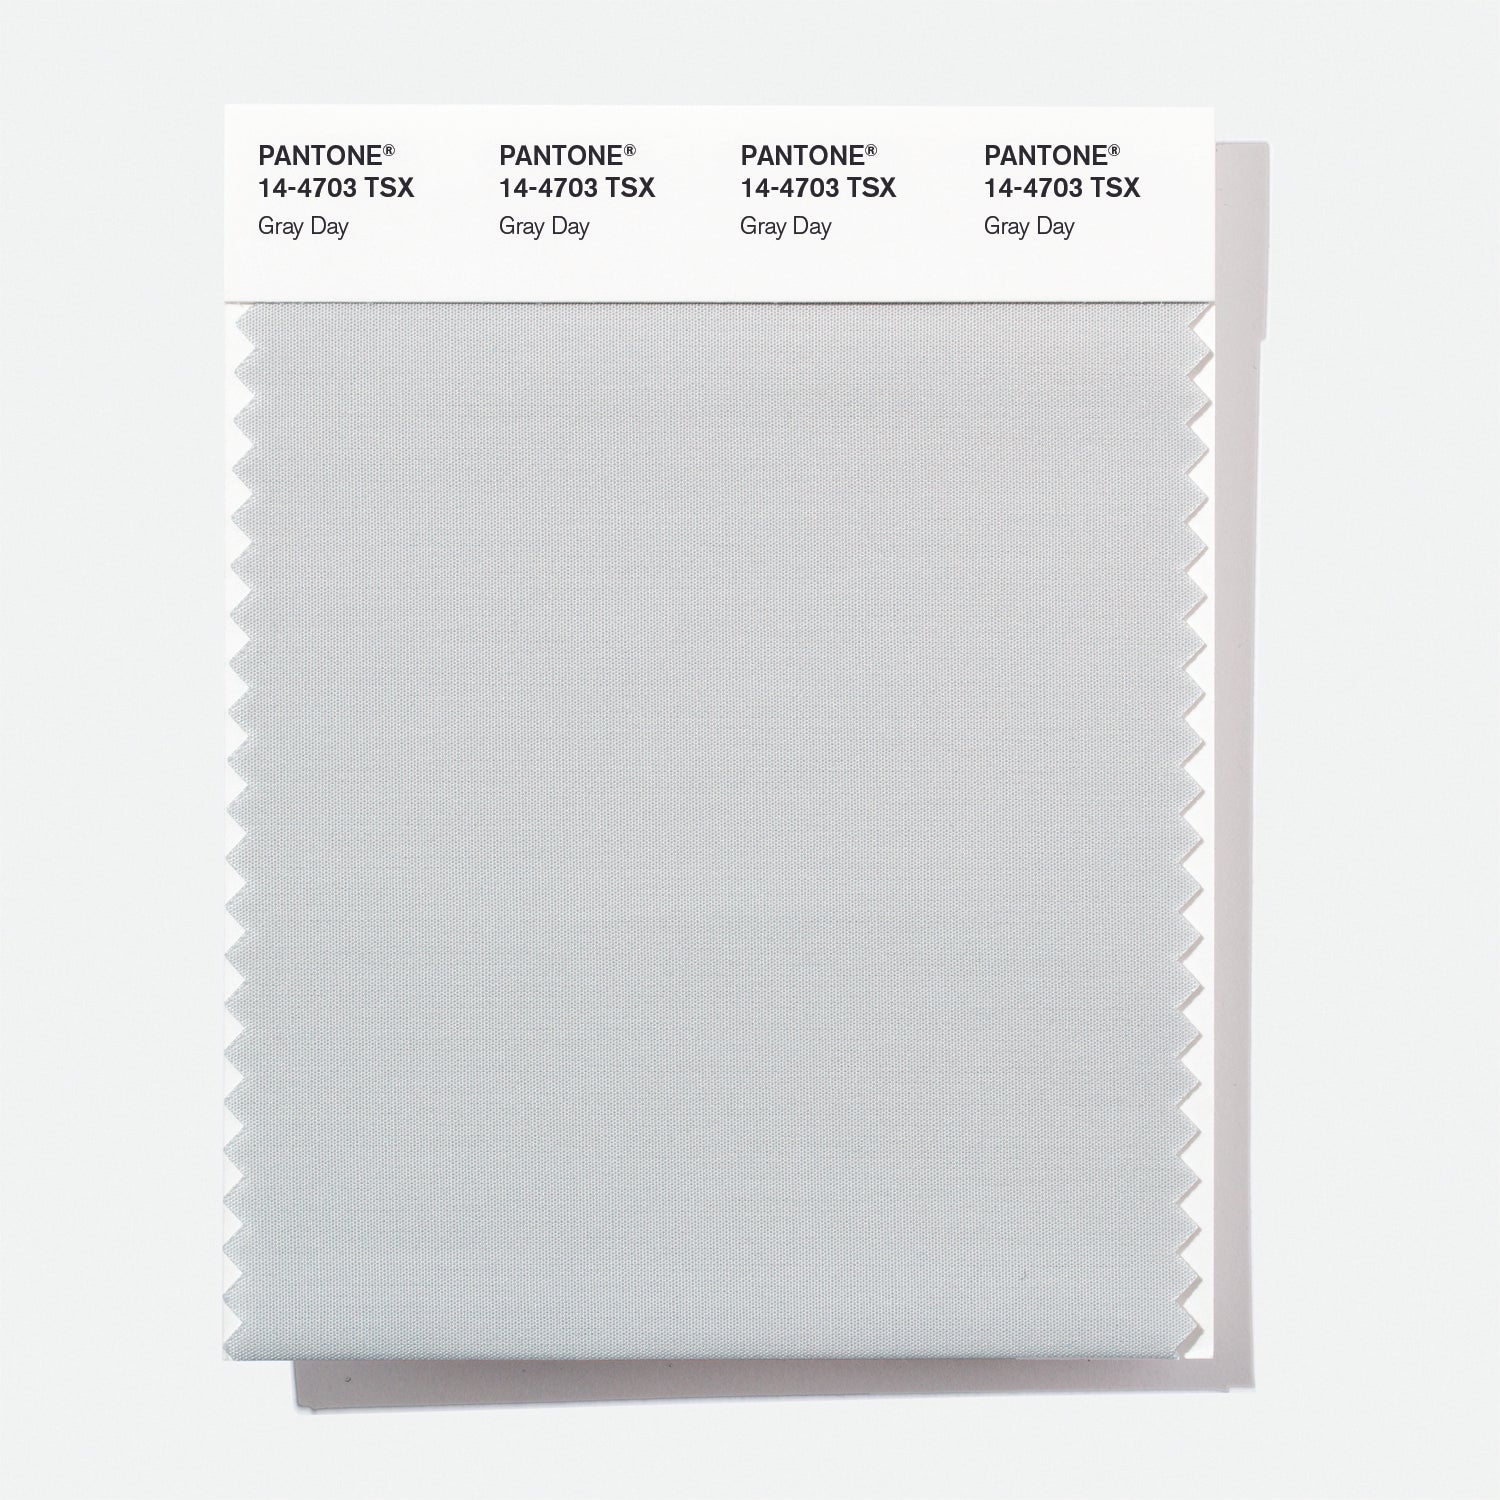 Pantone Polyester Swatch Card 14-4703 TSX (Gray Day)